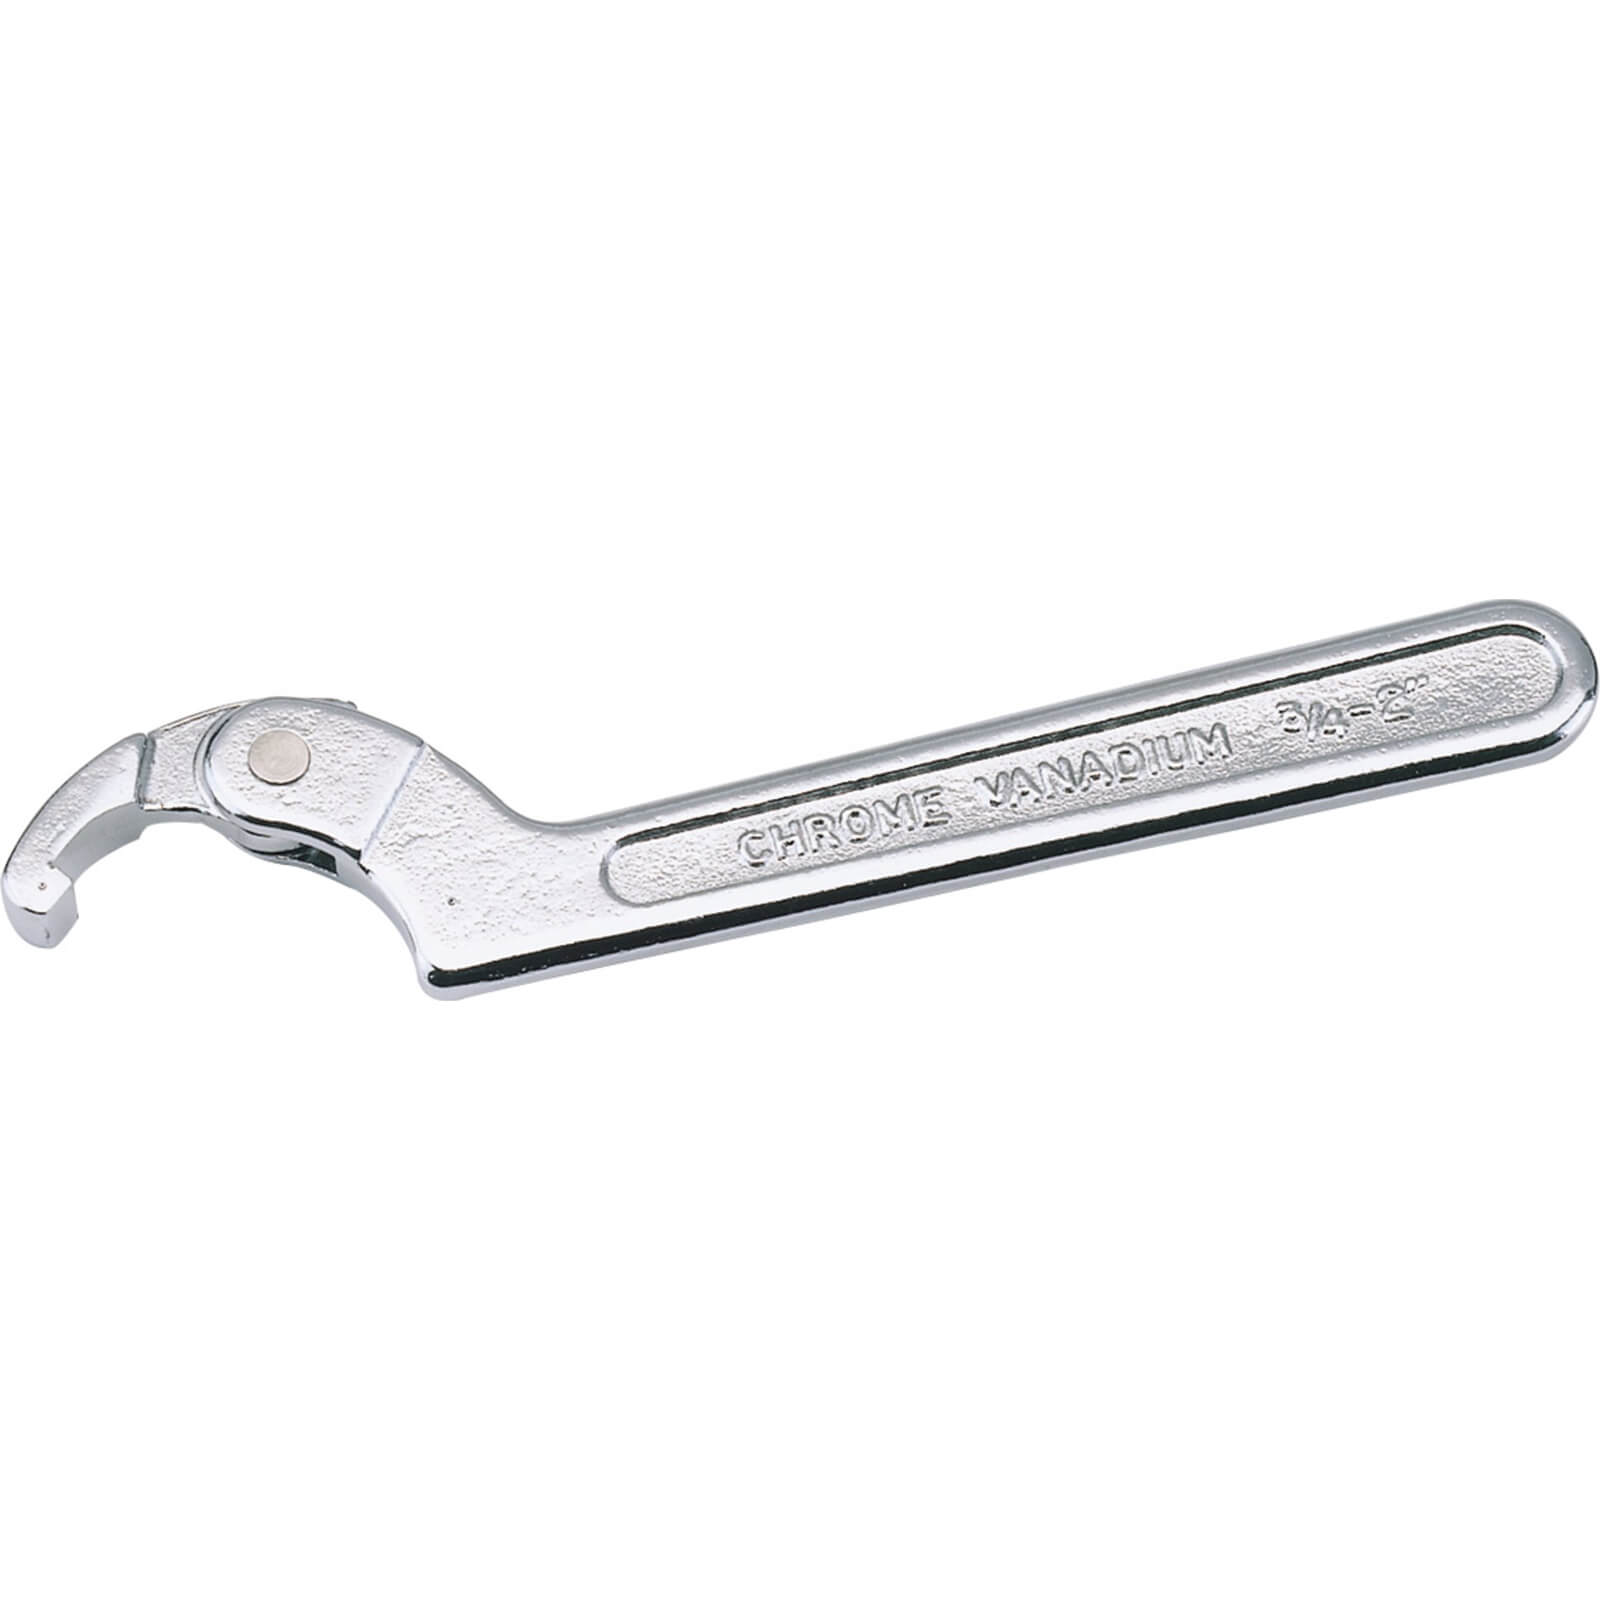 Image of Draper Hook and Pin Spanner 19mm x 51mm